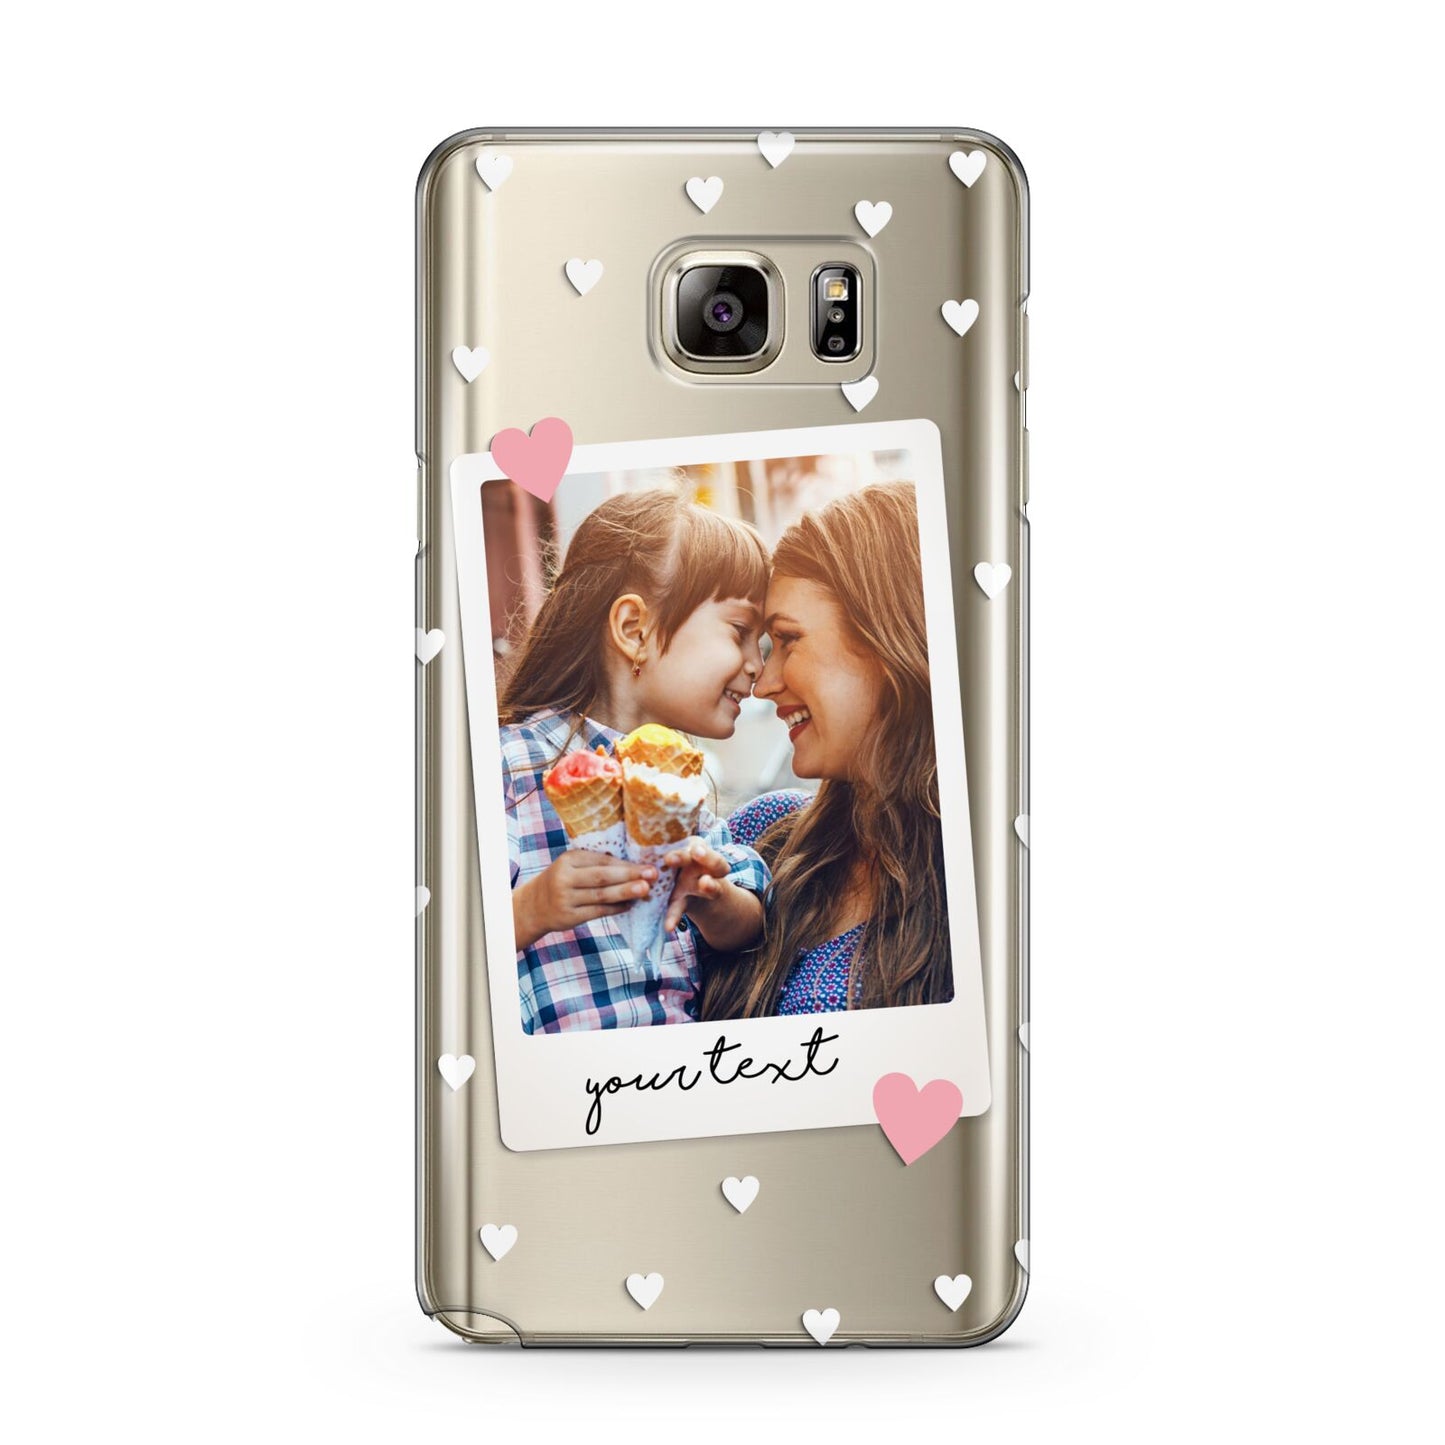 Personalised Photo Love Hearts Samsung Galaxy Note 5 Case